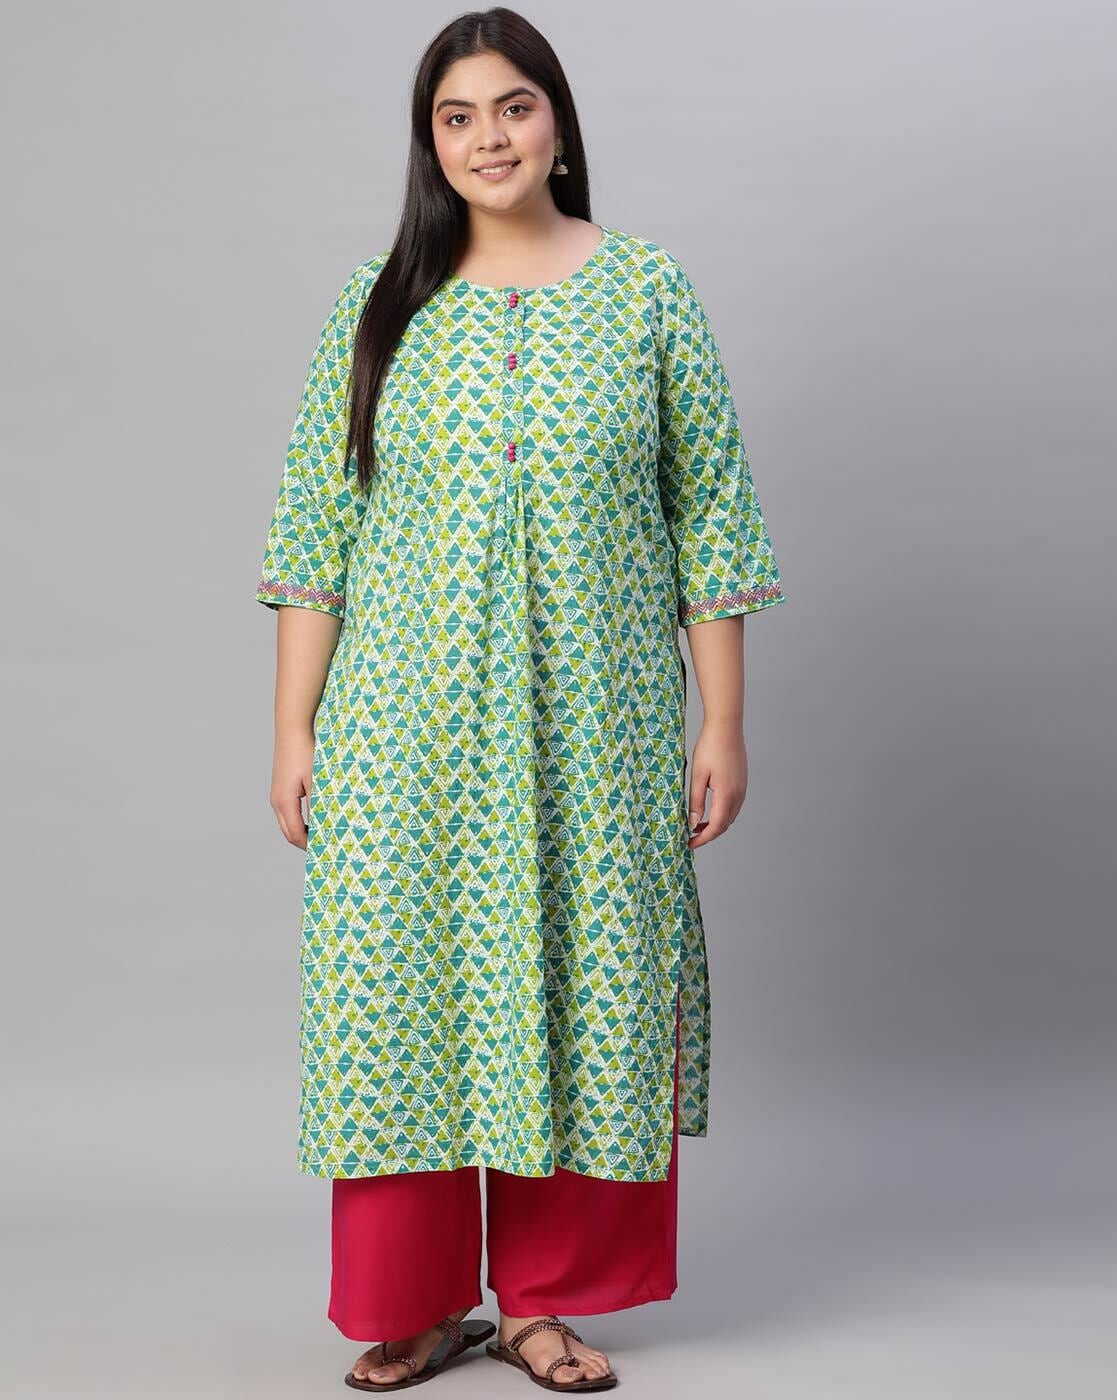 Plus Size Clothing Ideas For Different Occasions – Indian Wear by  Reetafashion - Issuu